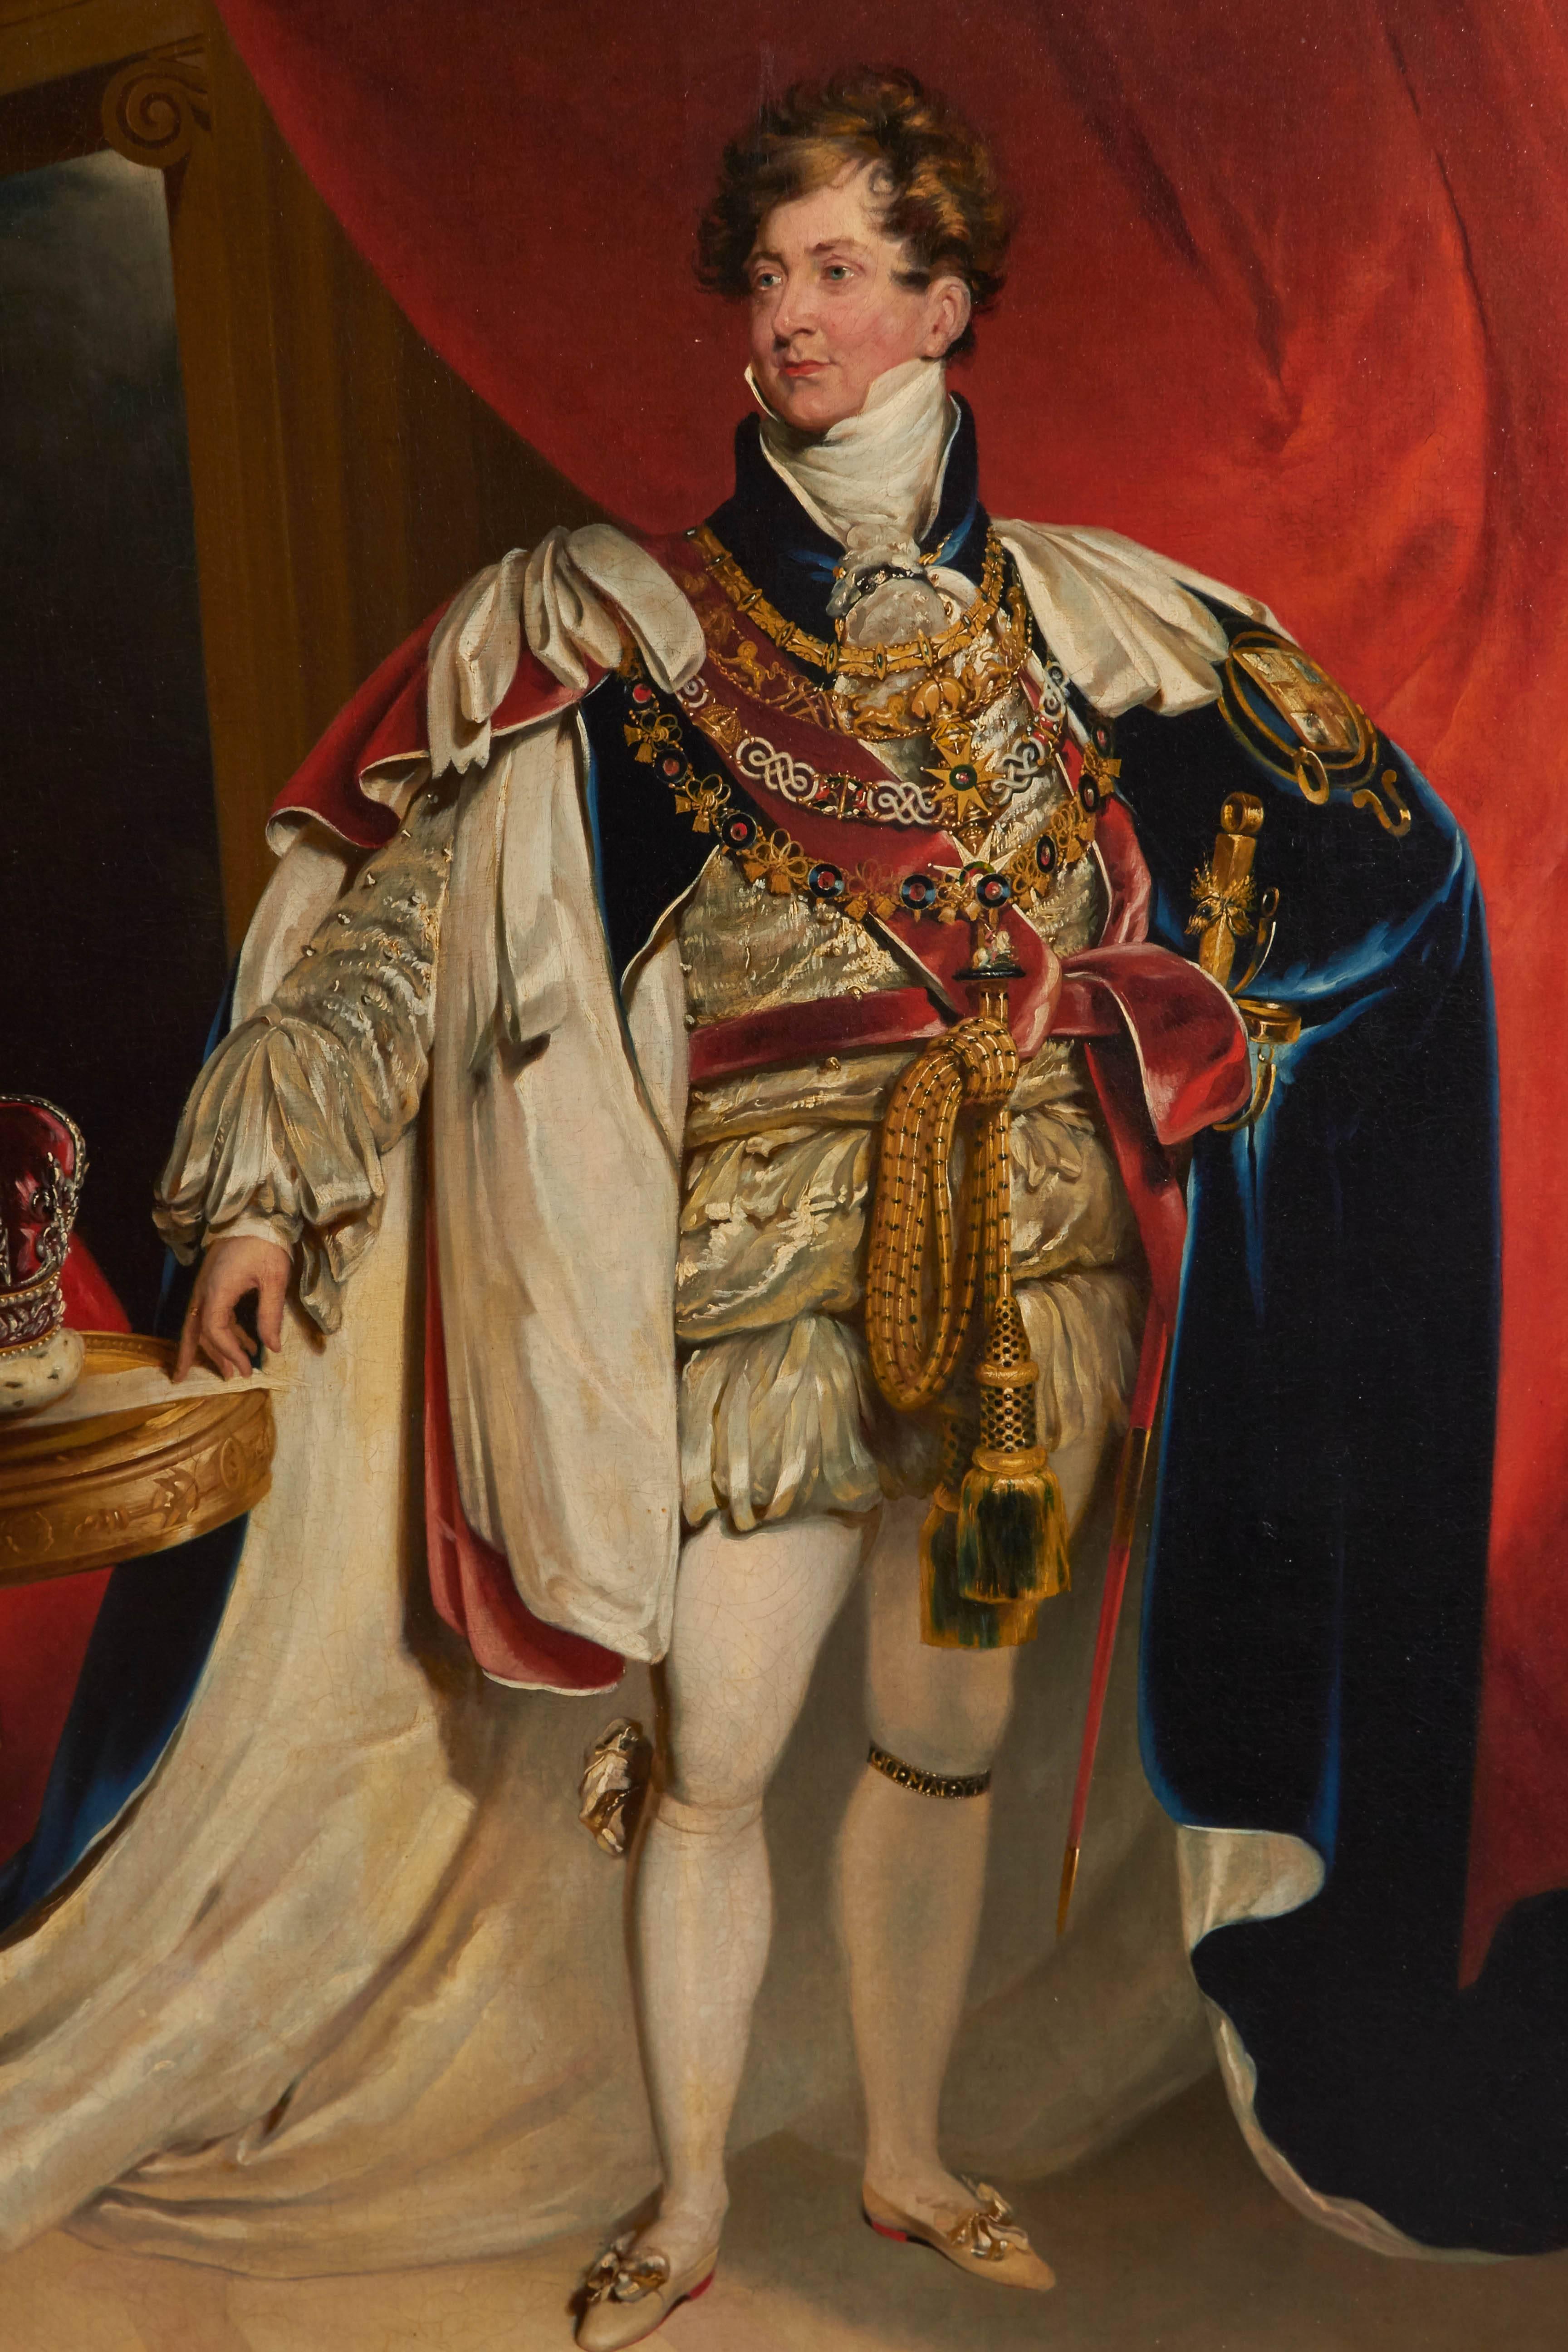 Copy of 'King George IV', Oil on Canvas 1